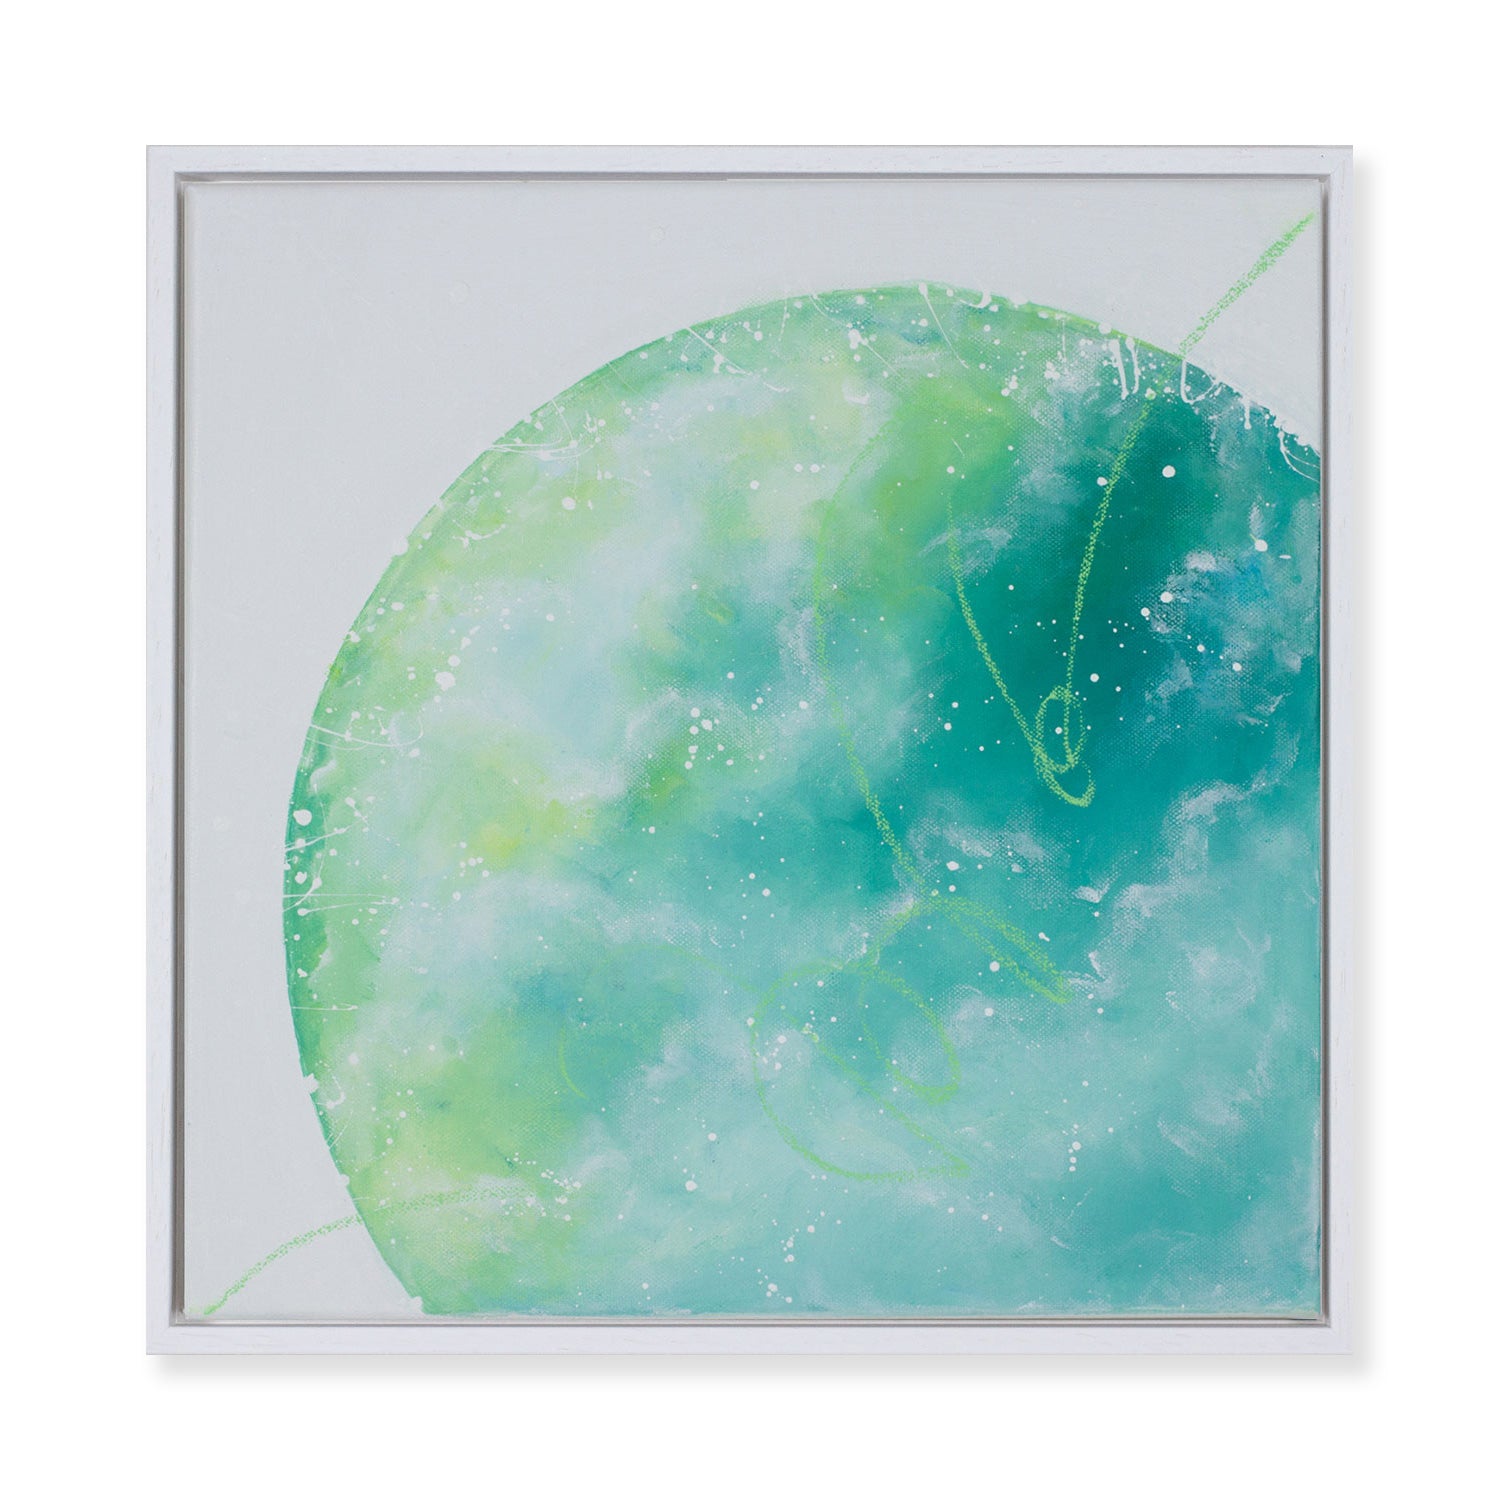 Awakening | Framed Earth painting with green clouds 40cm x 40cm